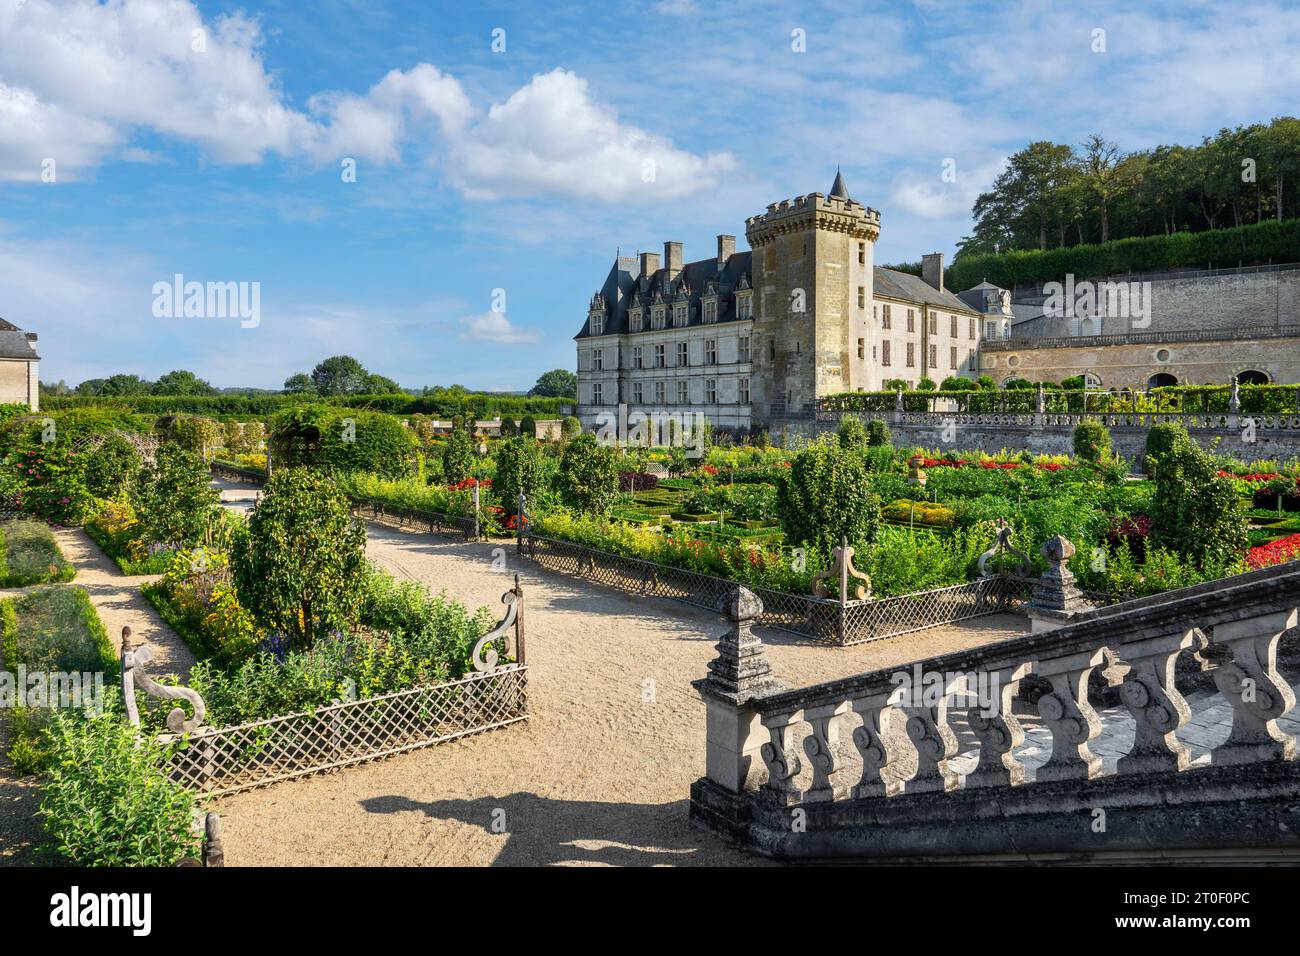 Villandry Castle is located about 17 km west of the city of Tours. Villandry Castle is most famous for its gardens. The eponymous village of Villandry is located on the Cher River and is the last commune before its confluence with the Loire River. Stock Photo